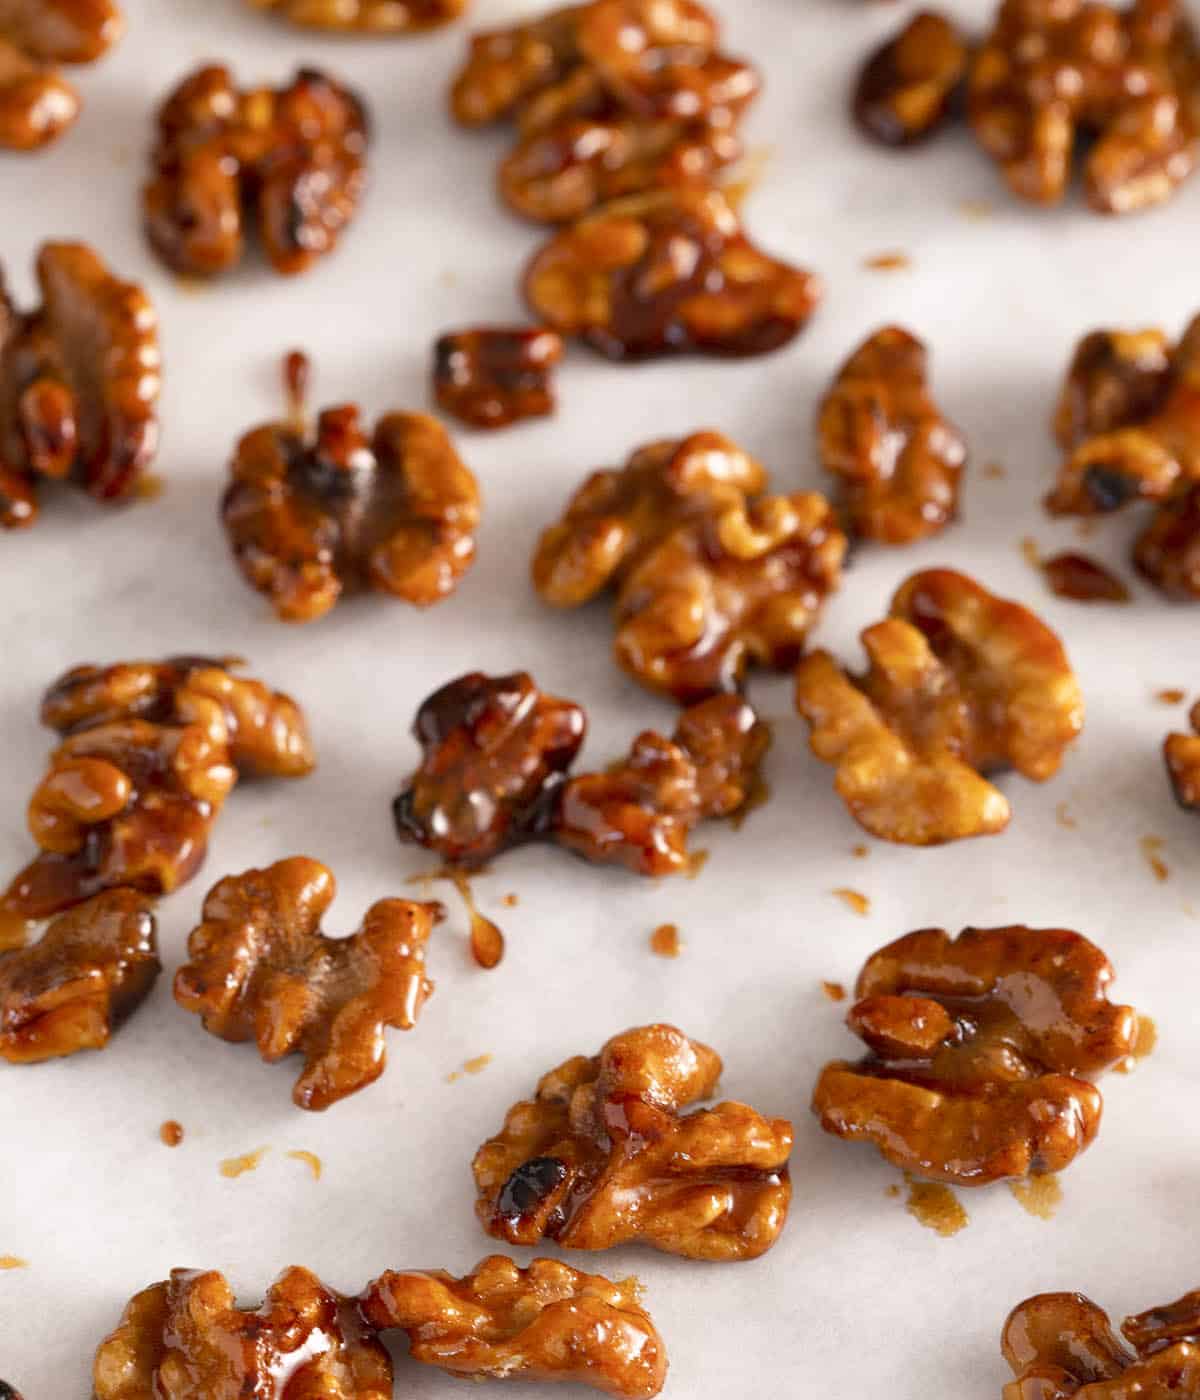 Candied walnuts spread out on a sheet of white parchment paper.